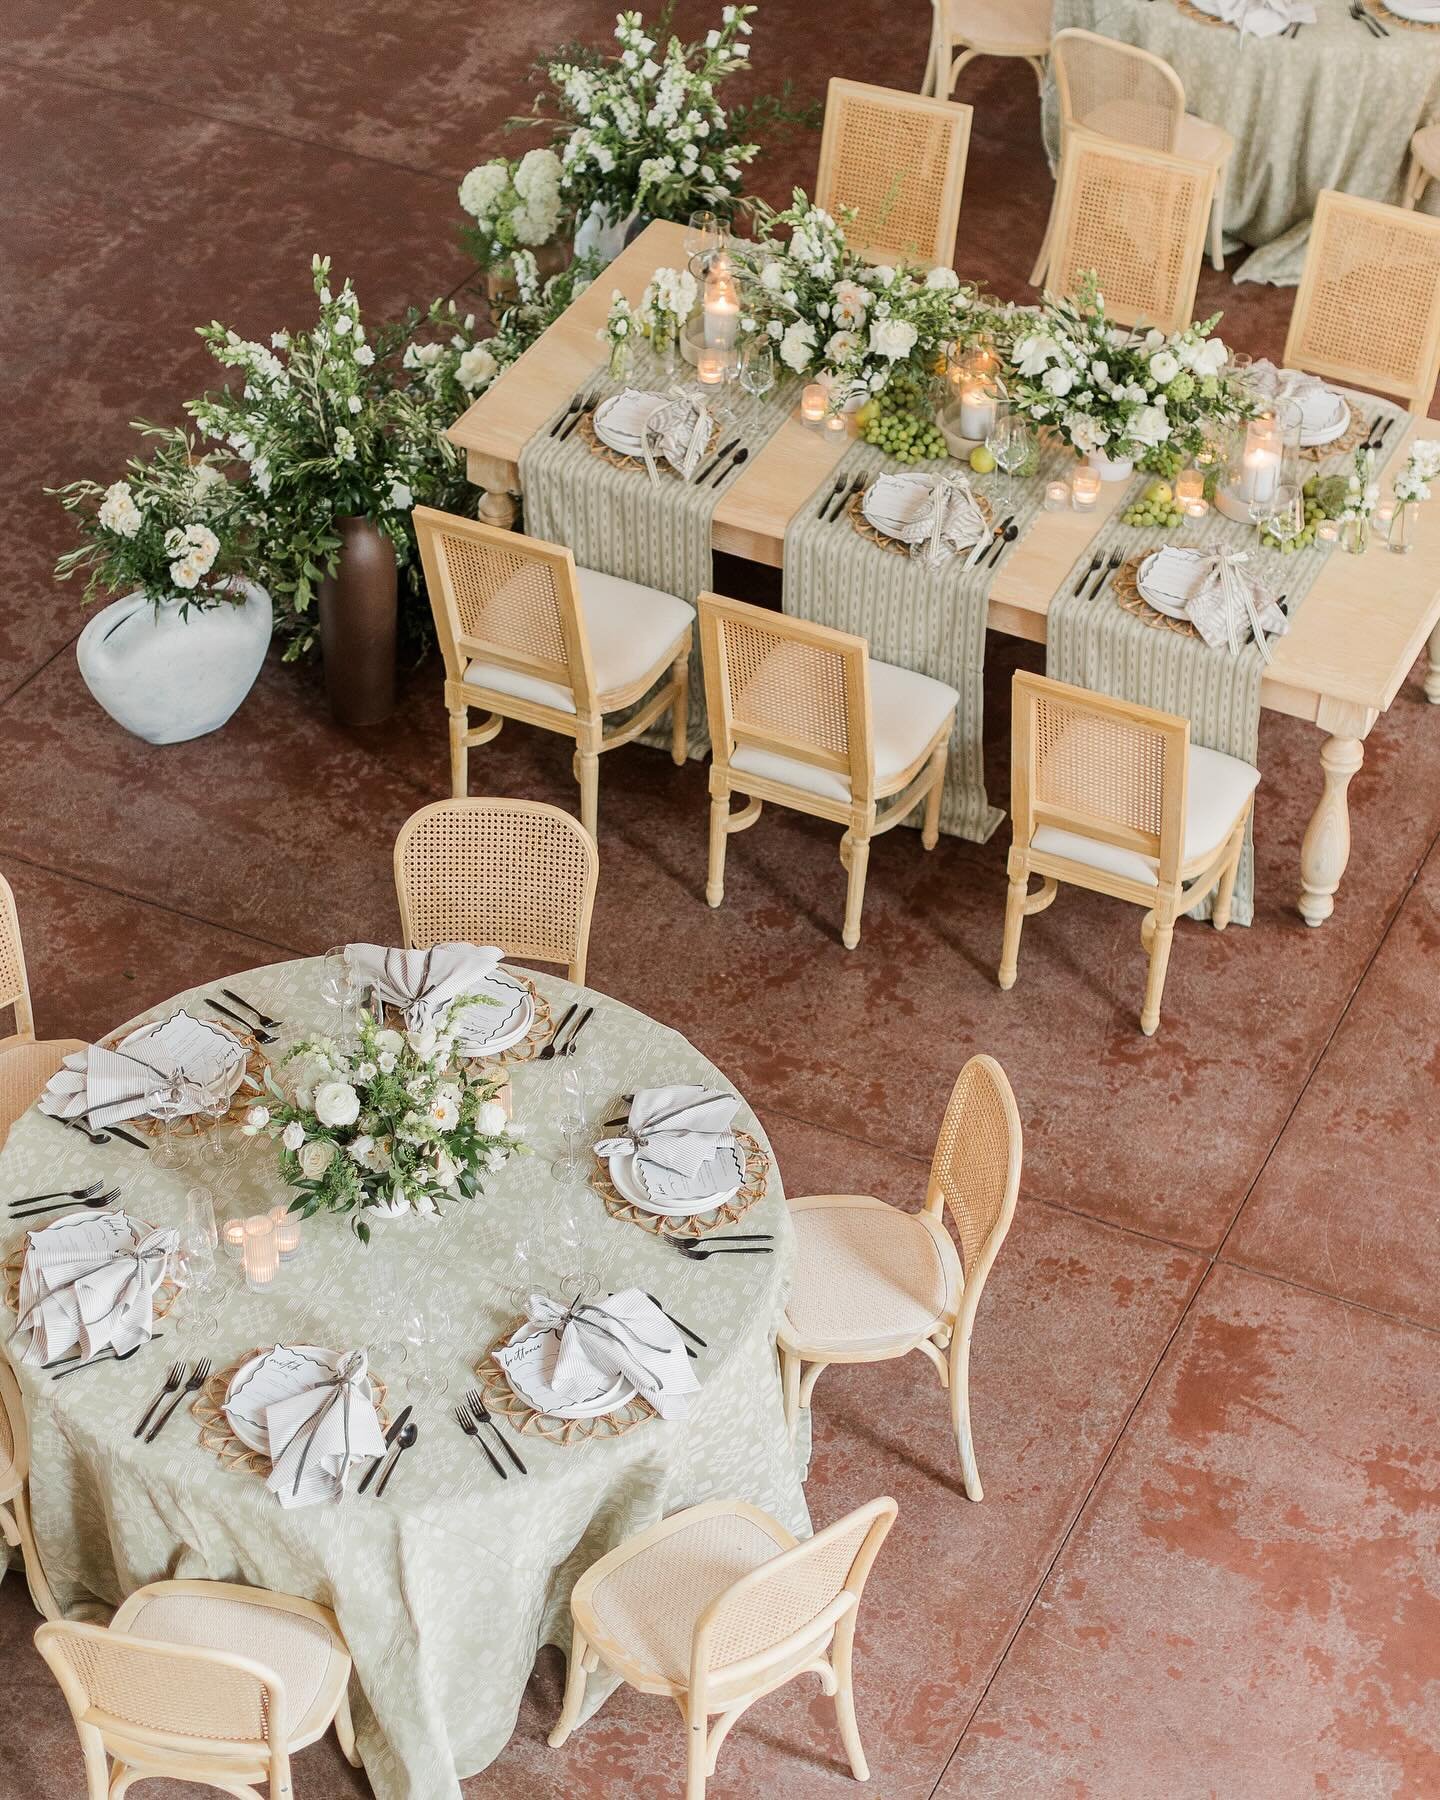 Mixing round &amp; long tables + pattern style linens can feel a bit scary, but the BRE team can curate a cohesive look that is sure to make a statement. 

Photography: @dakotaherseyphotography
Venue: @brooklynartscenterweddings
Speciality Rentals: @